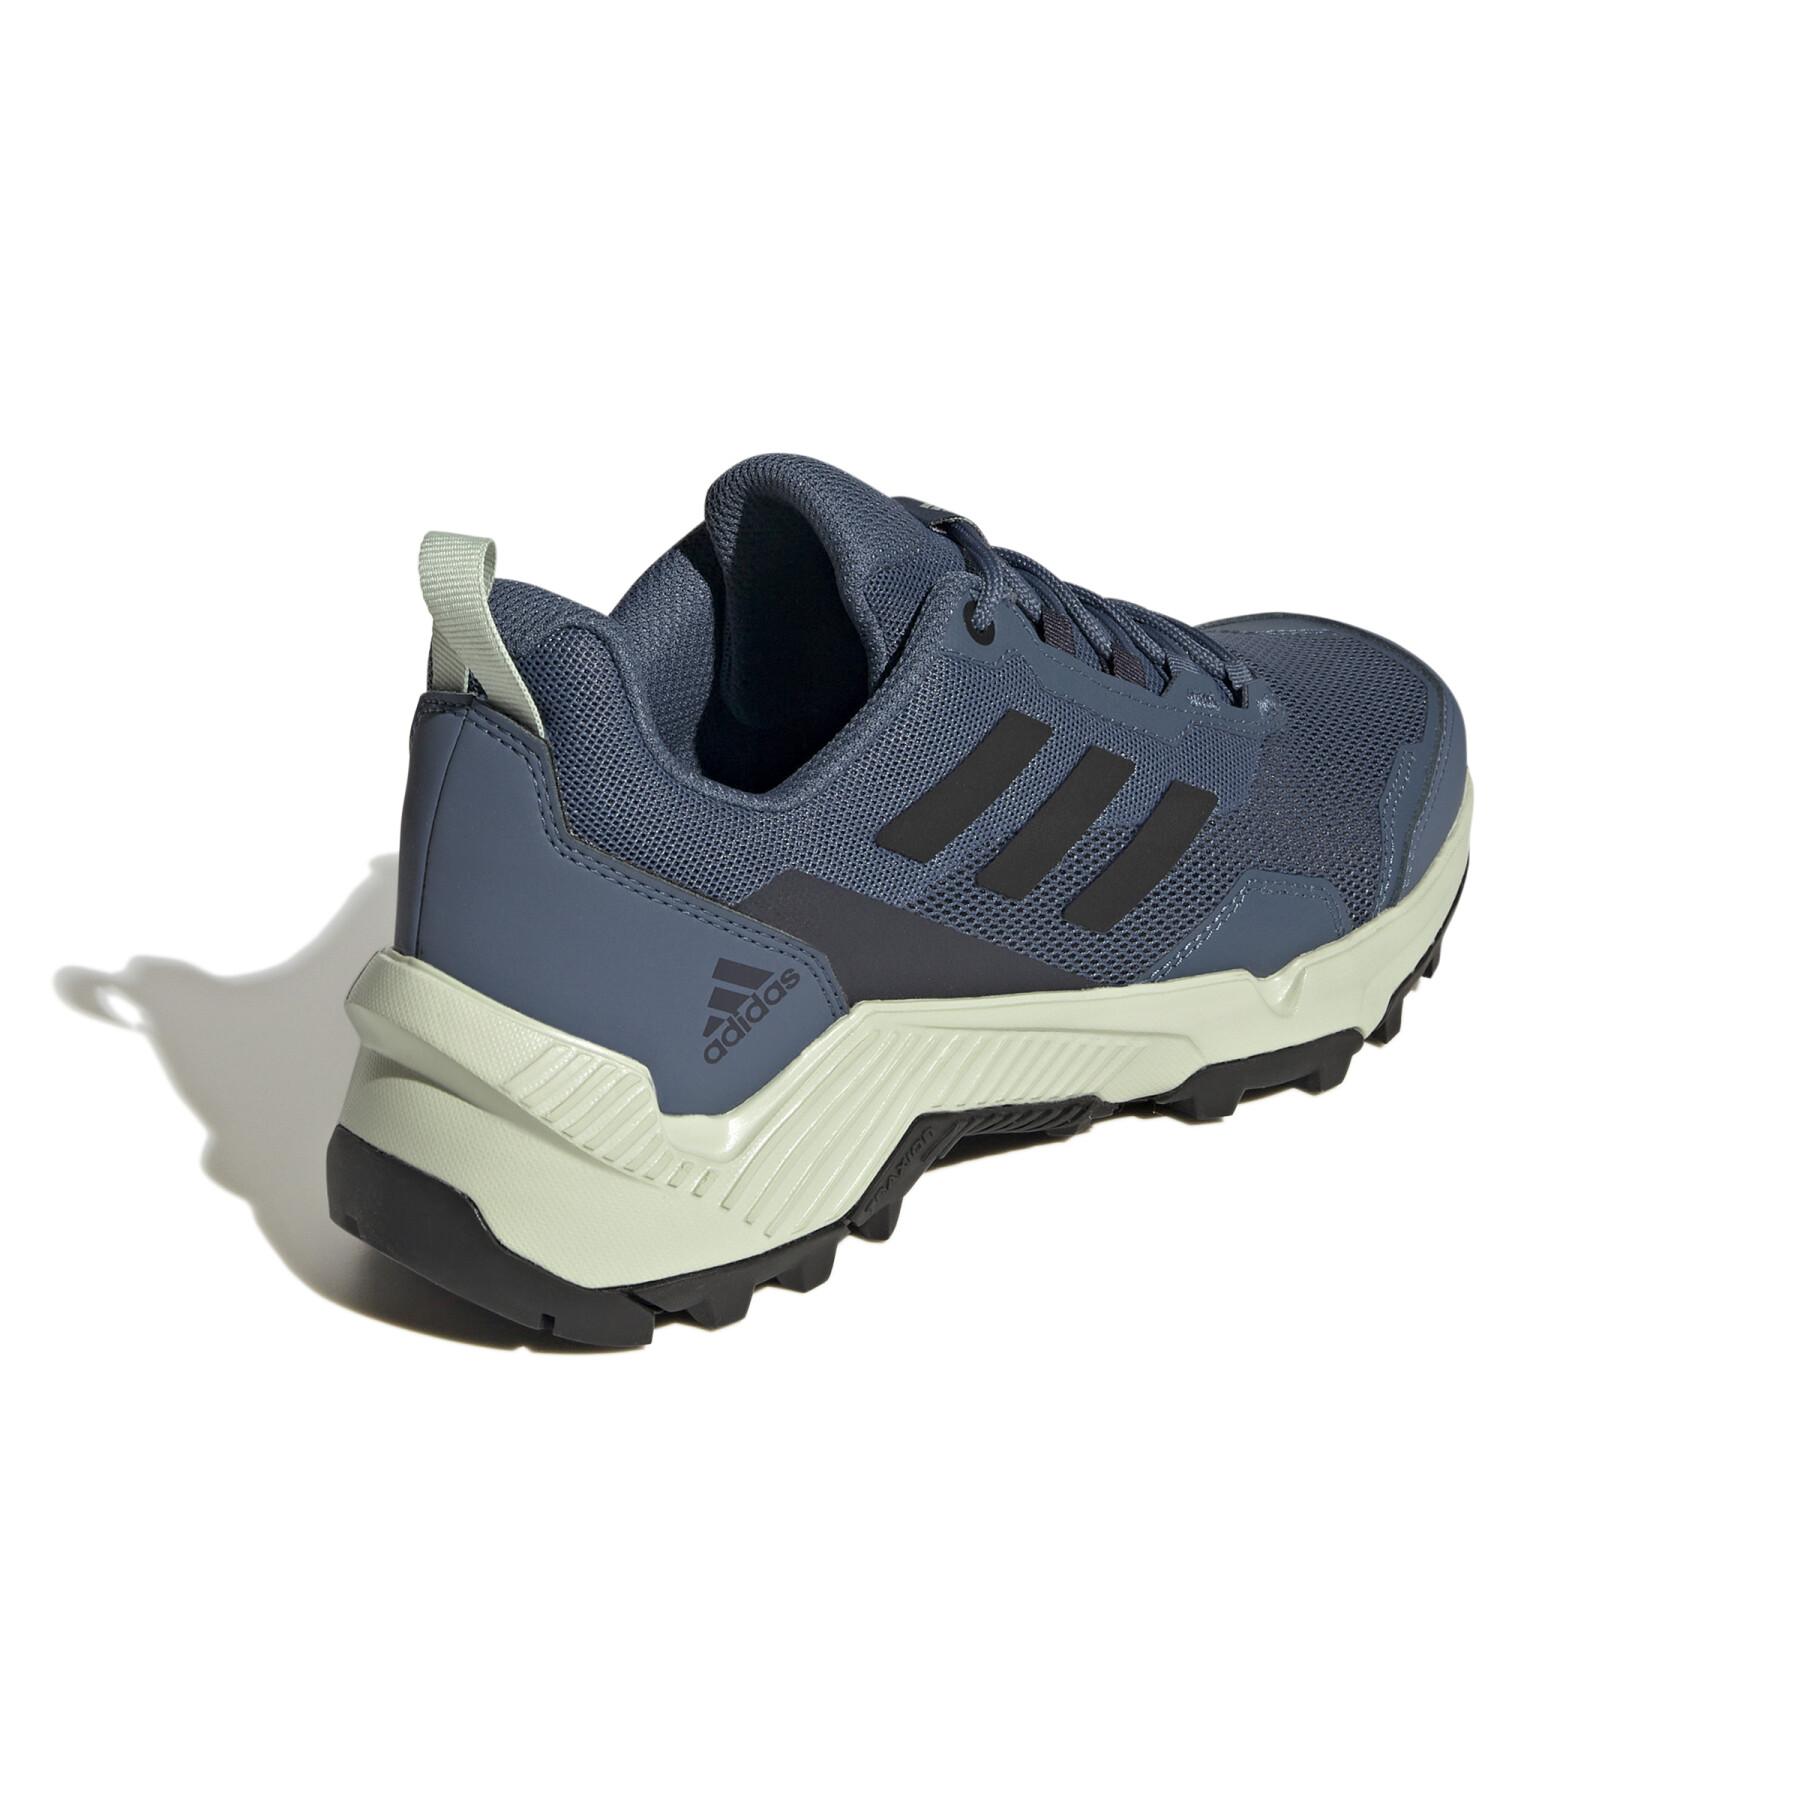 Women's Trail running shoes adidas Eastrail 2.0